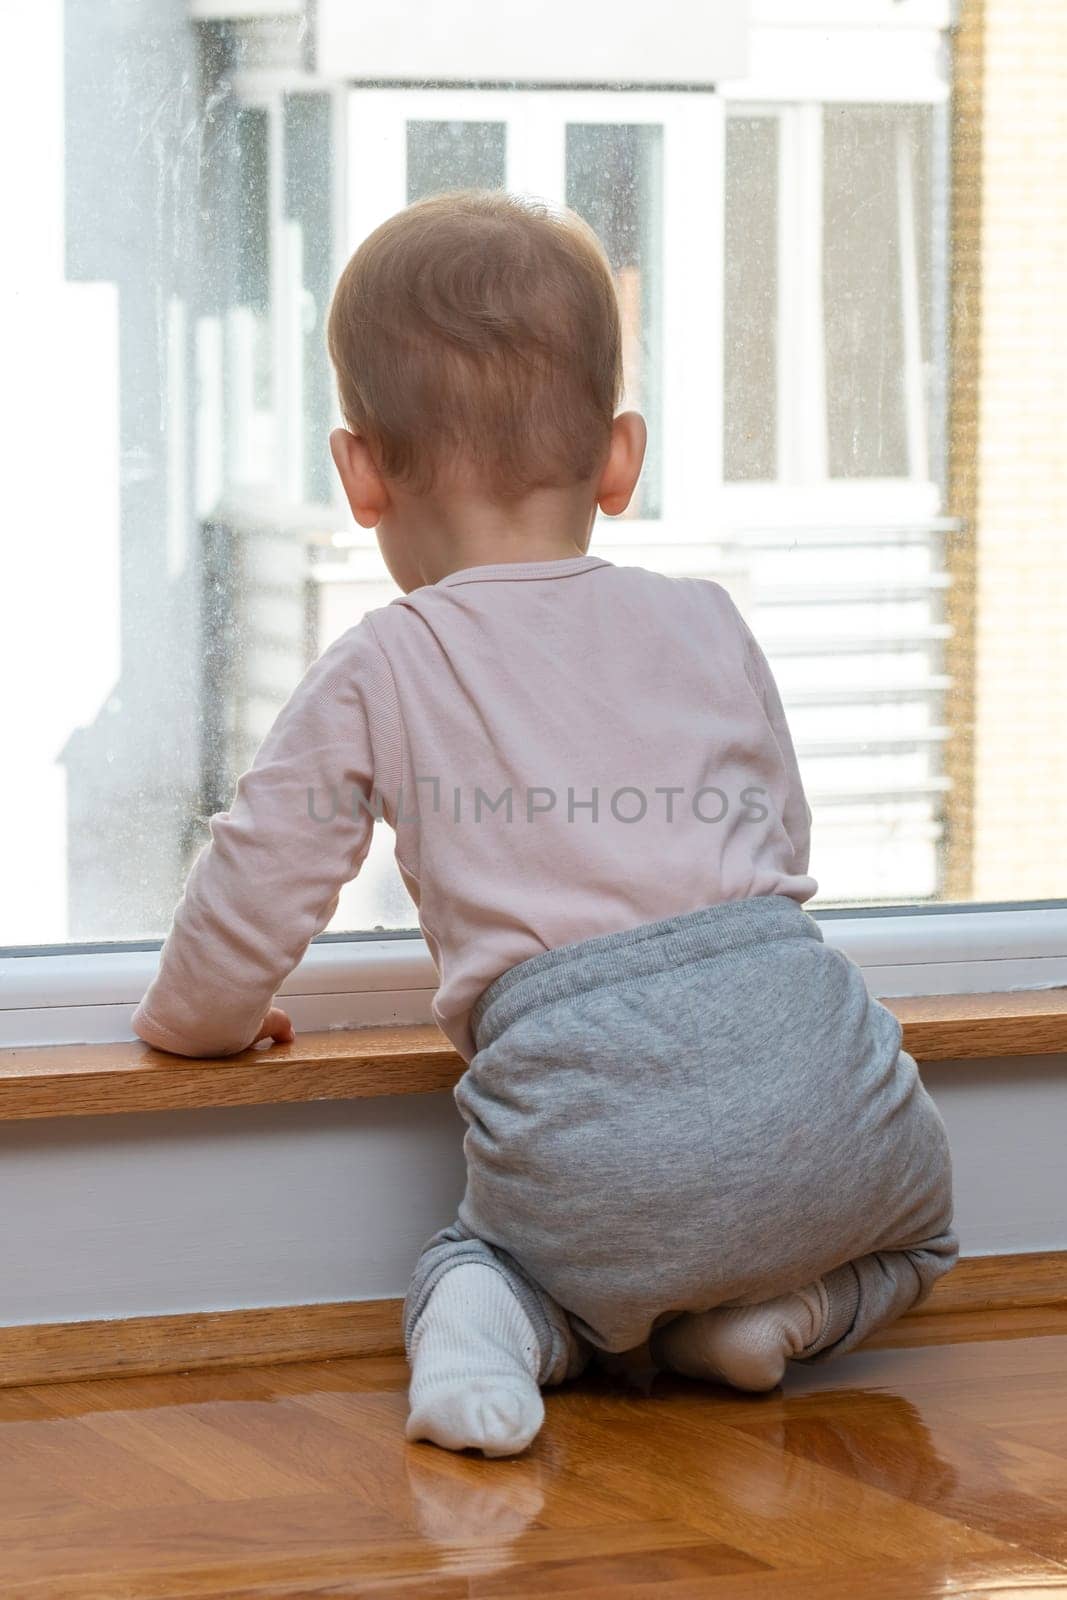 Baby gazes longingly through window, eager for an outdoor adventure. Concept of longing and childhood curiosity by Mariakray